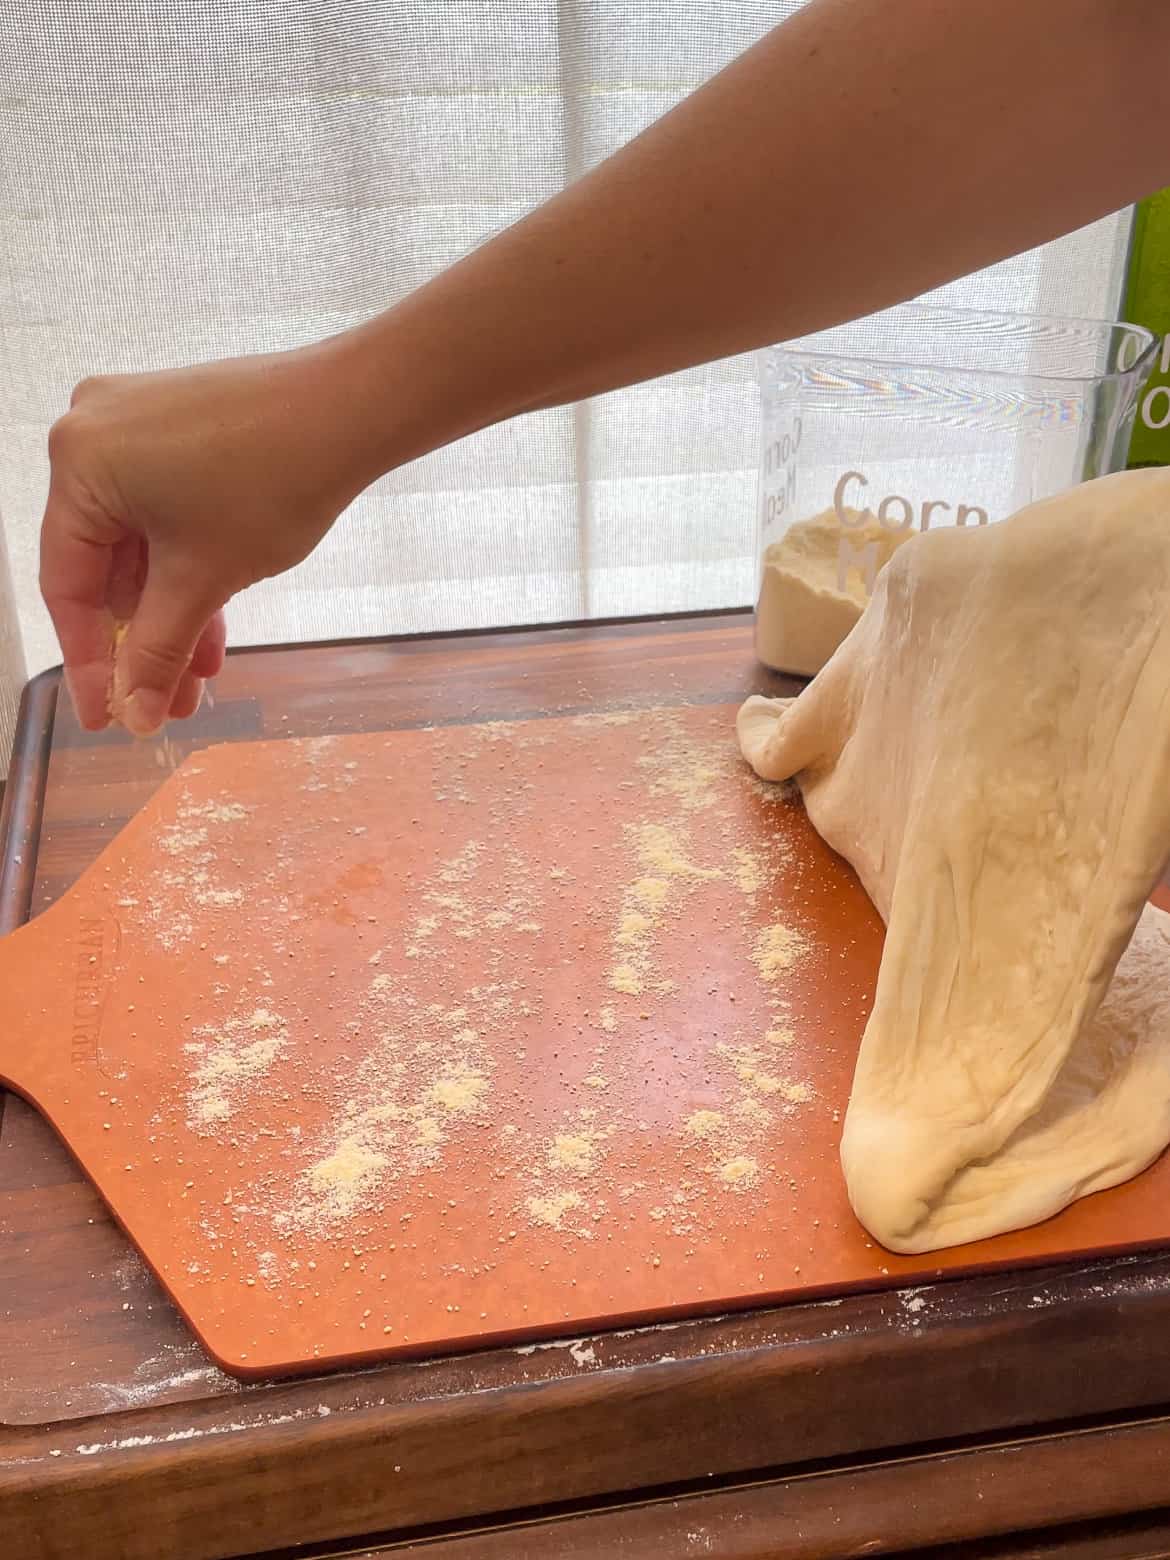 sprinkling cornmeal on a pizza peel while making homemade pizza dough